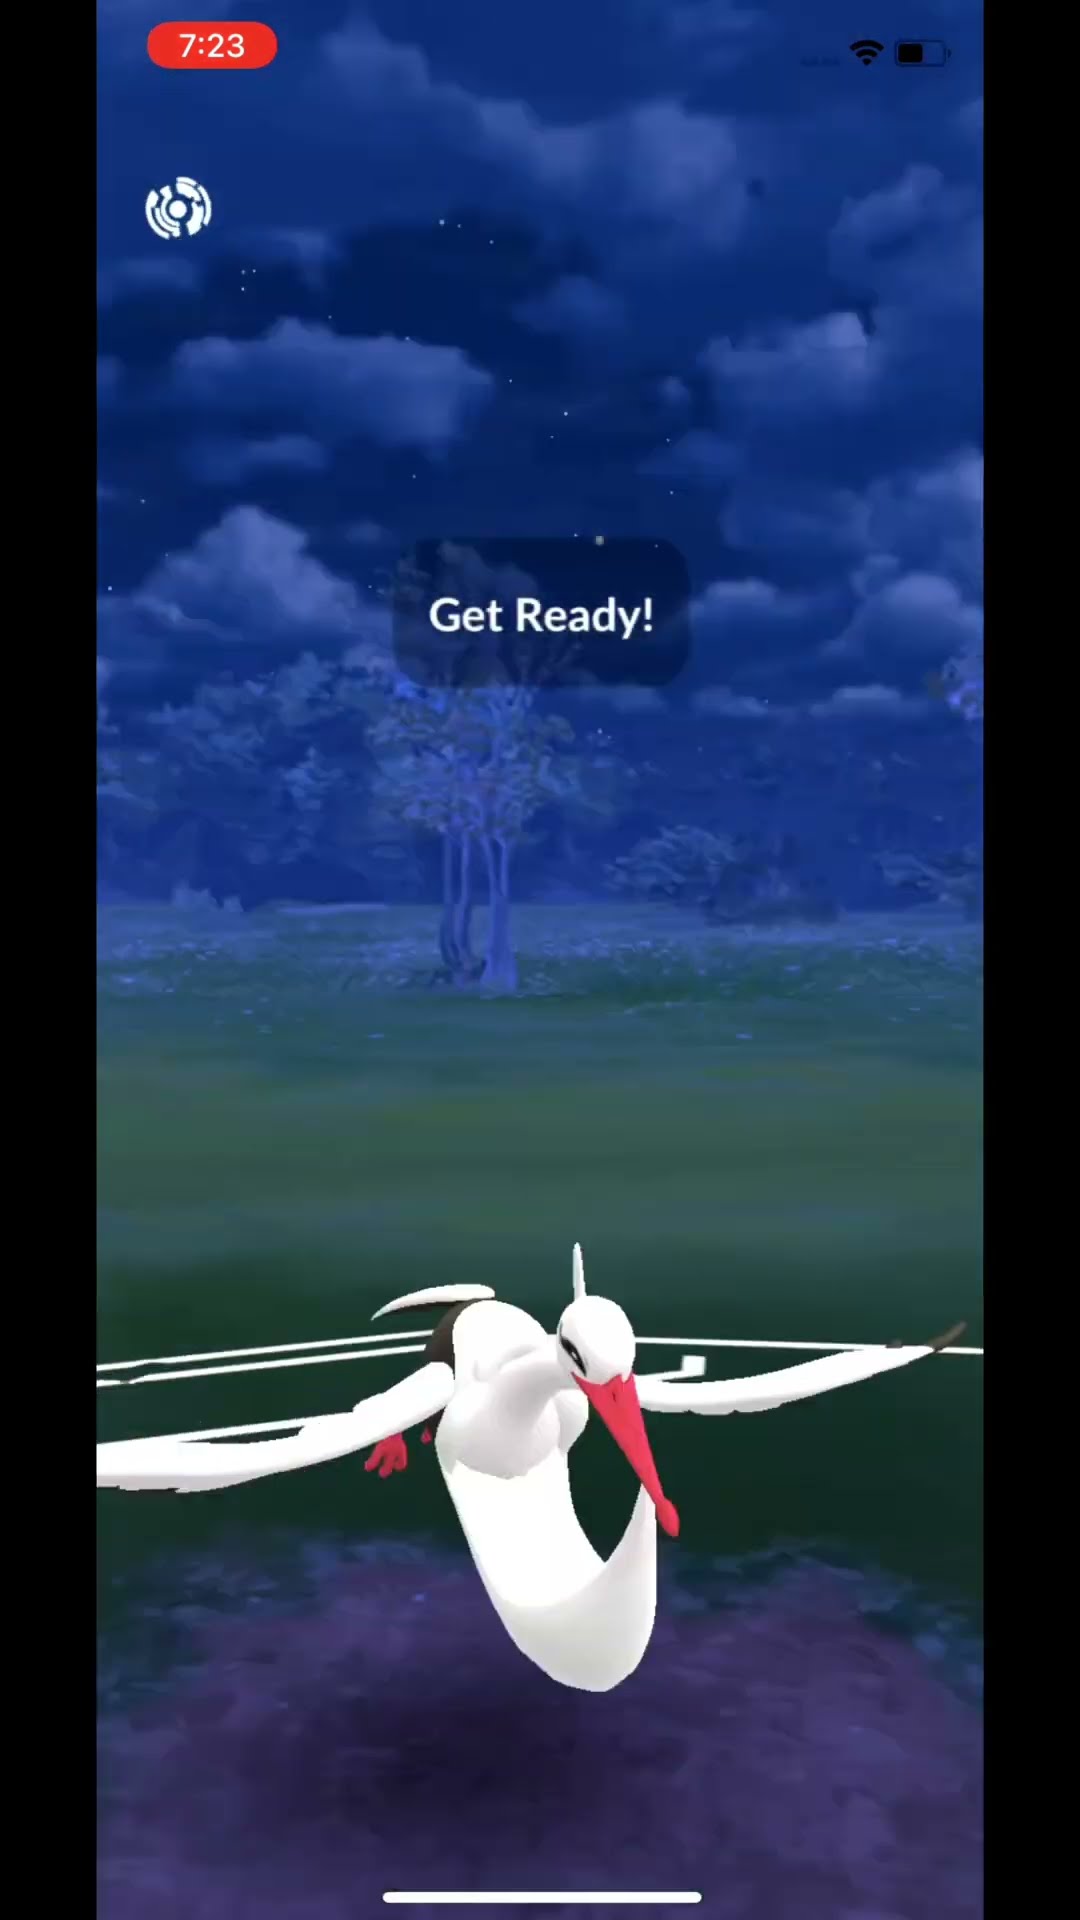 New Bombirdier With FLY is a Beast Pokemon Go